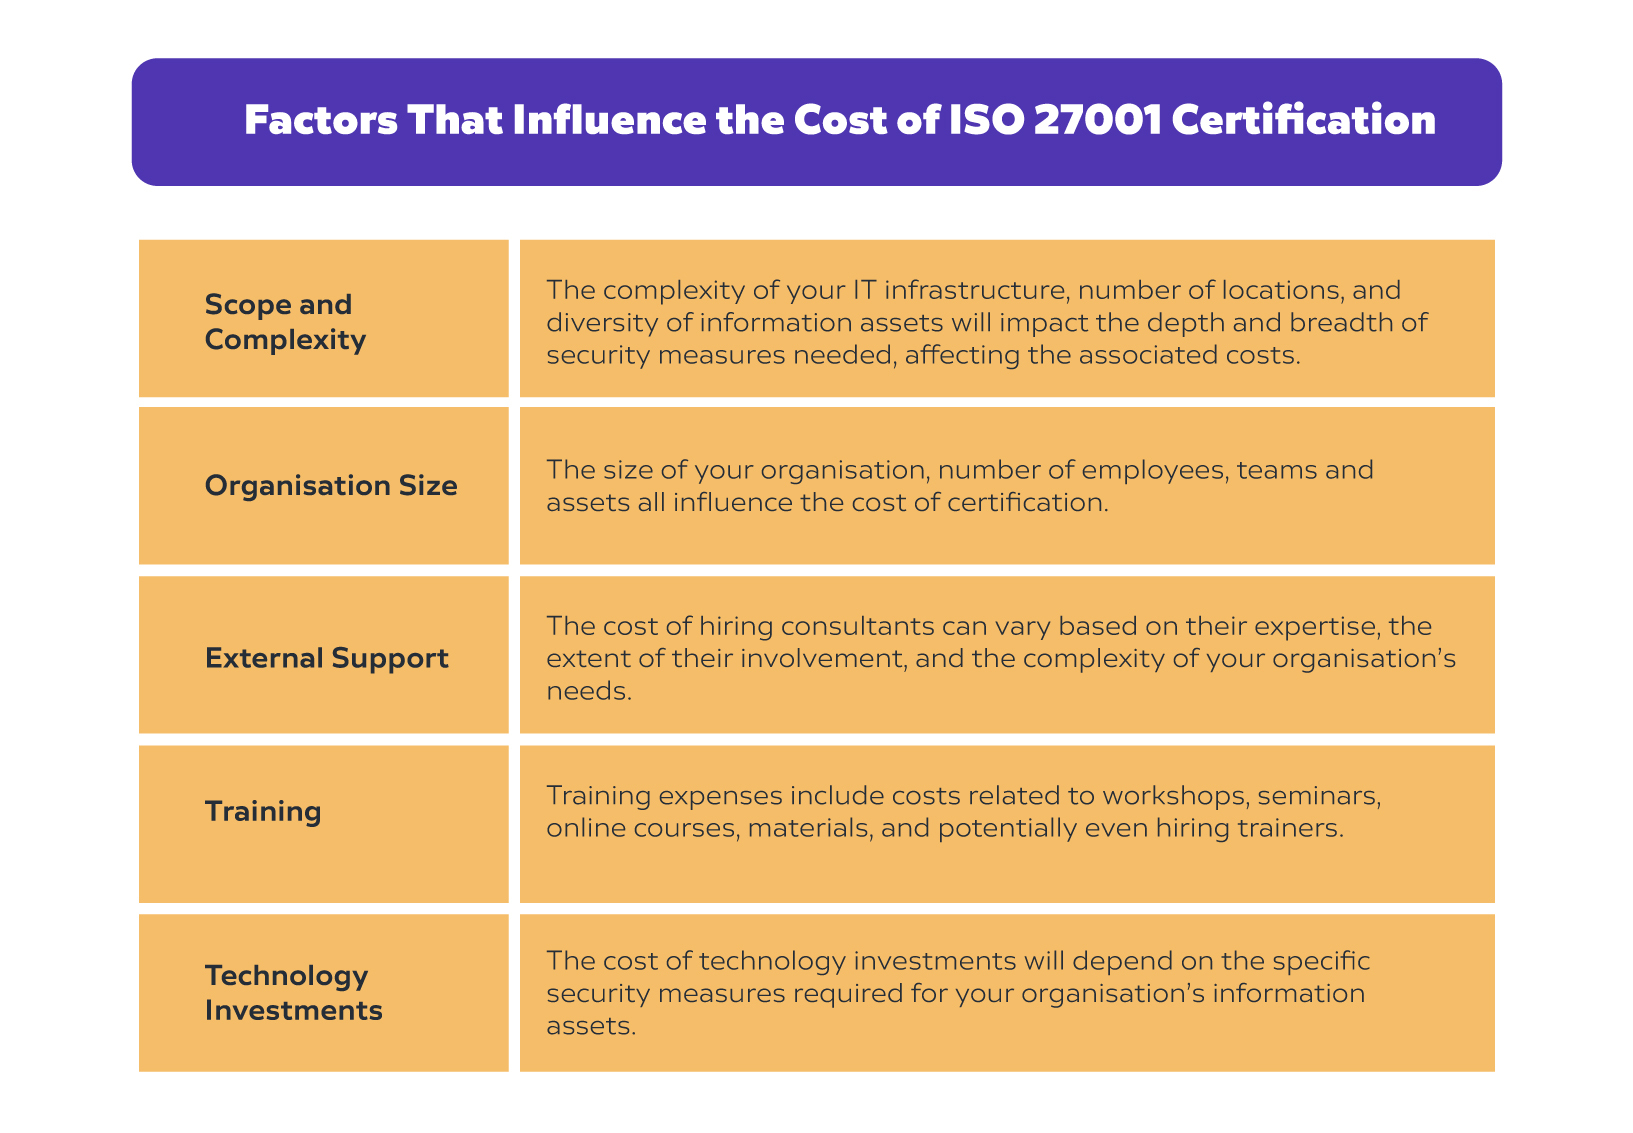 Factors that influence ISO 27001 cost - table